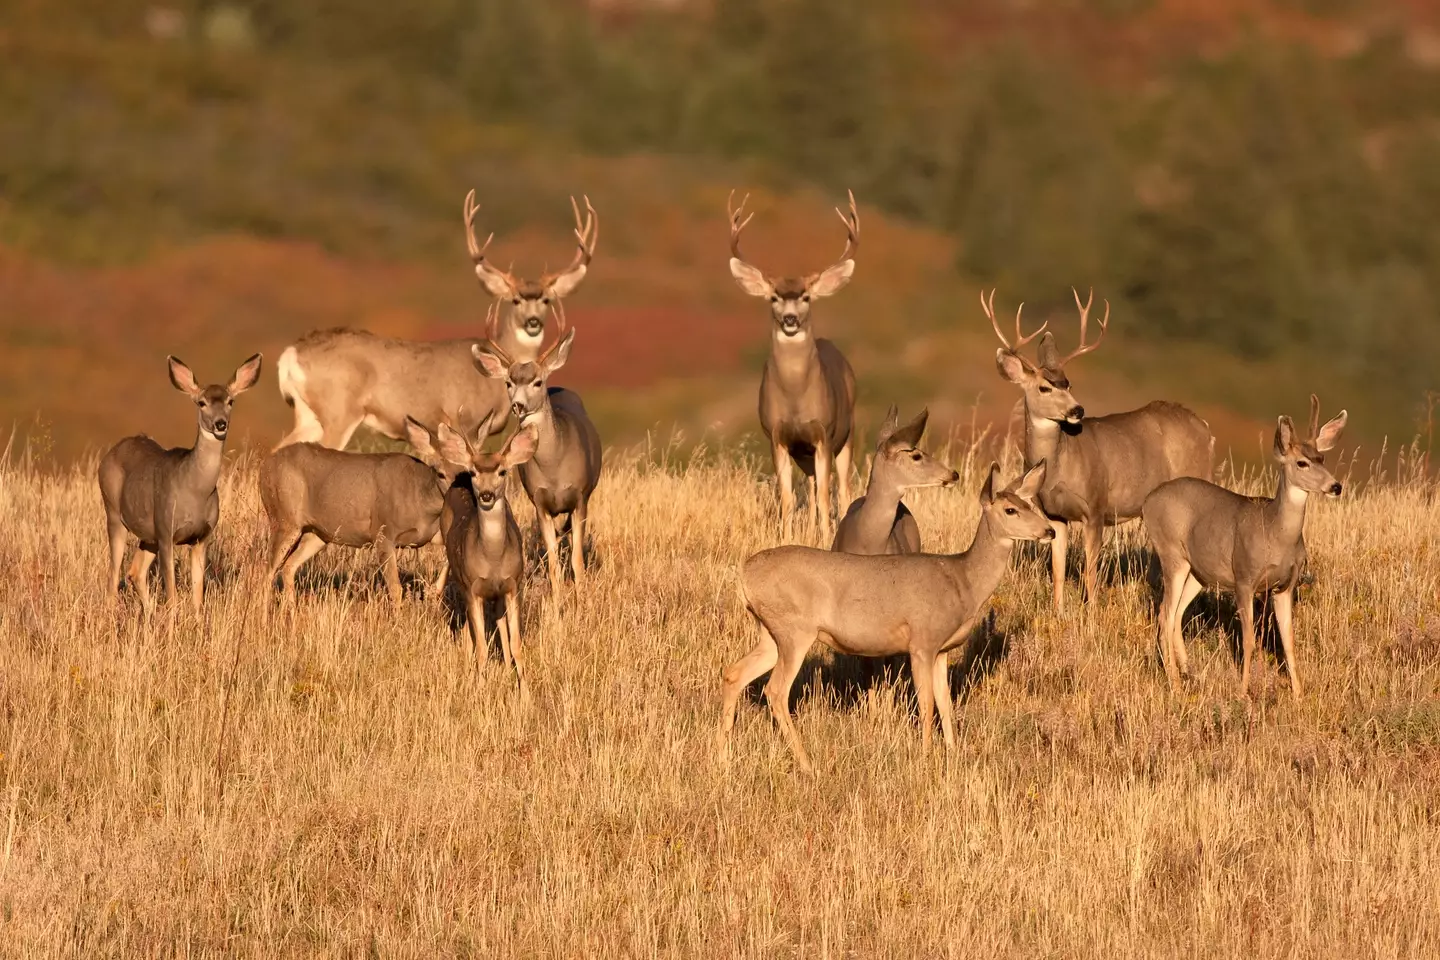 Scientists have issued a warning over 'zombie deer disease'.